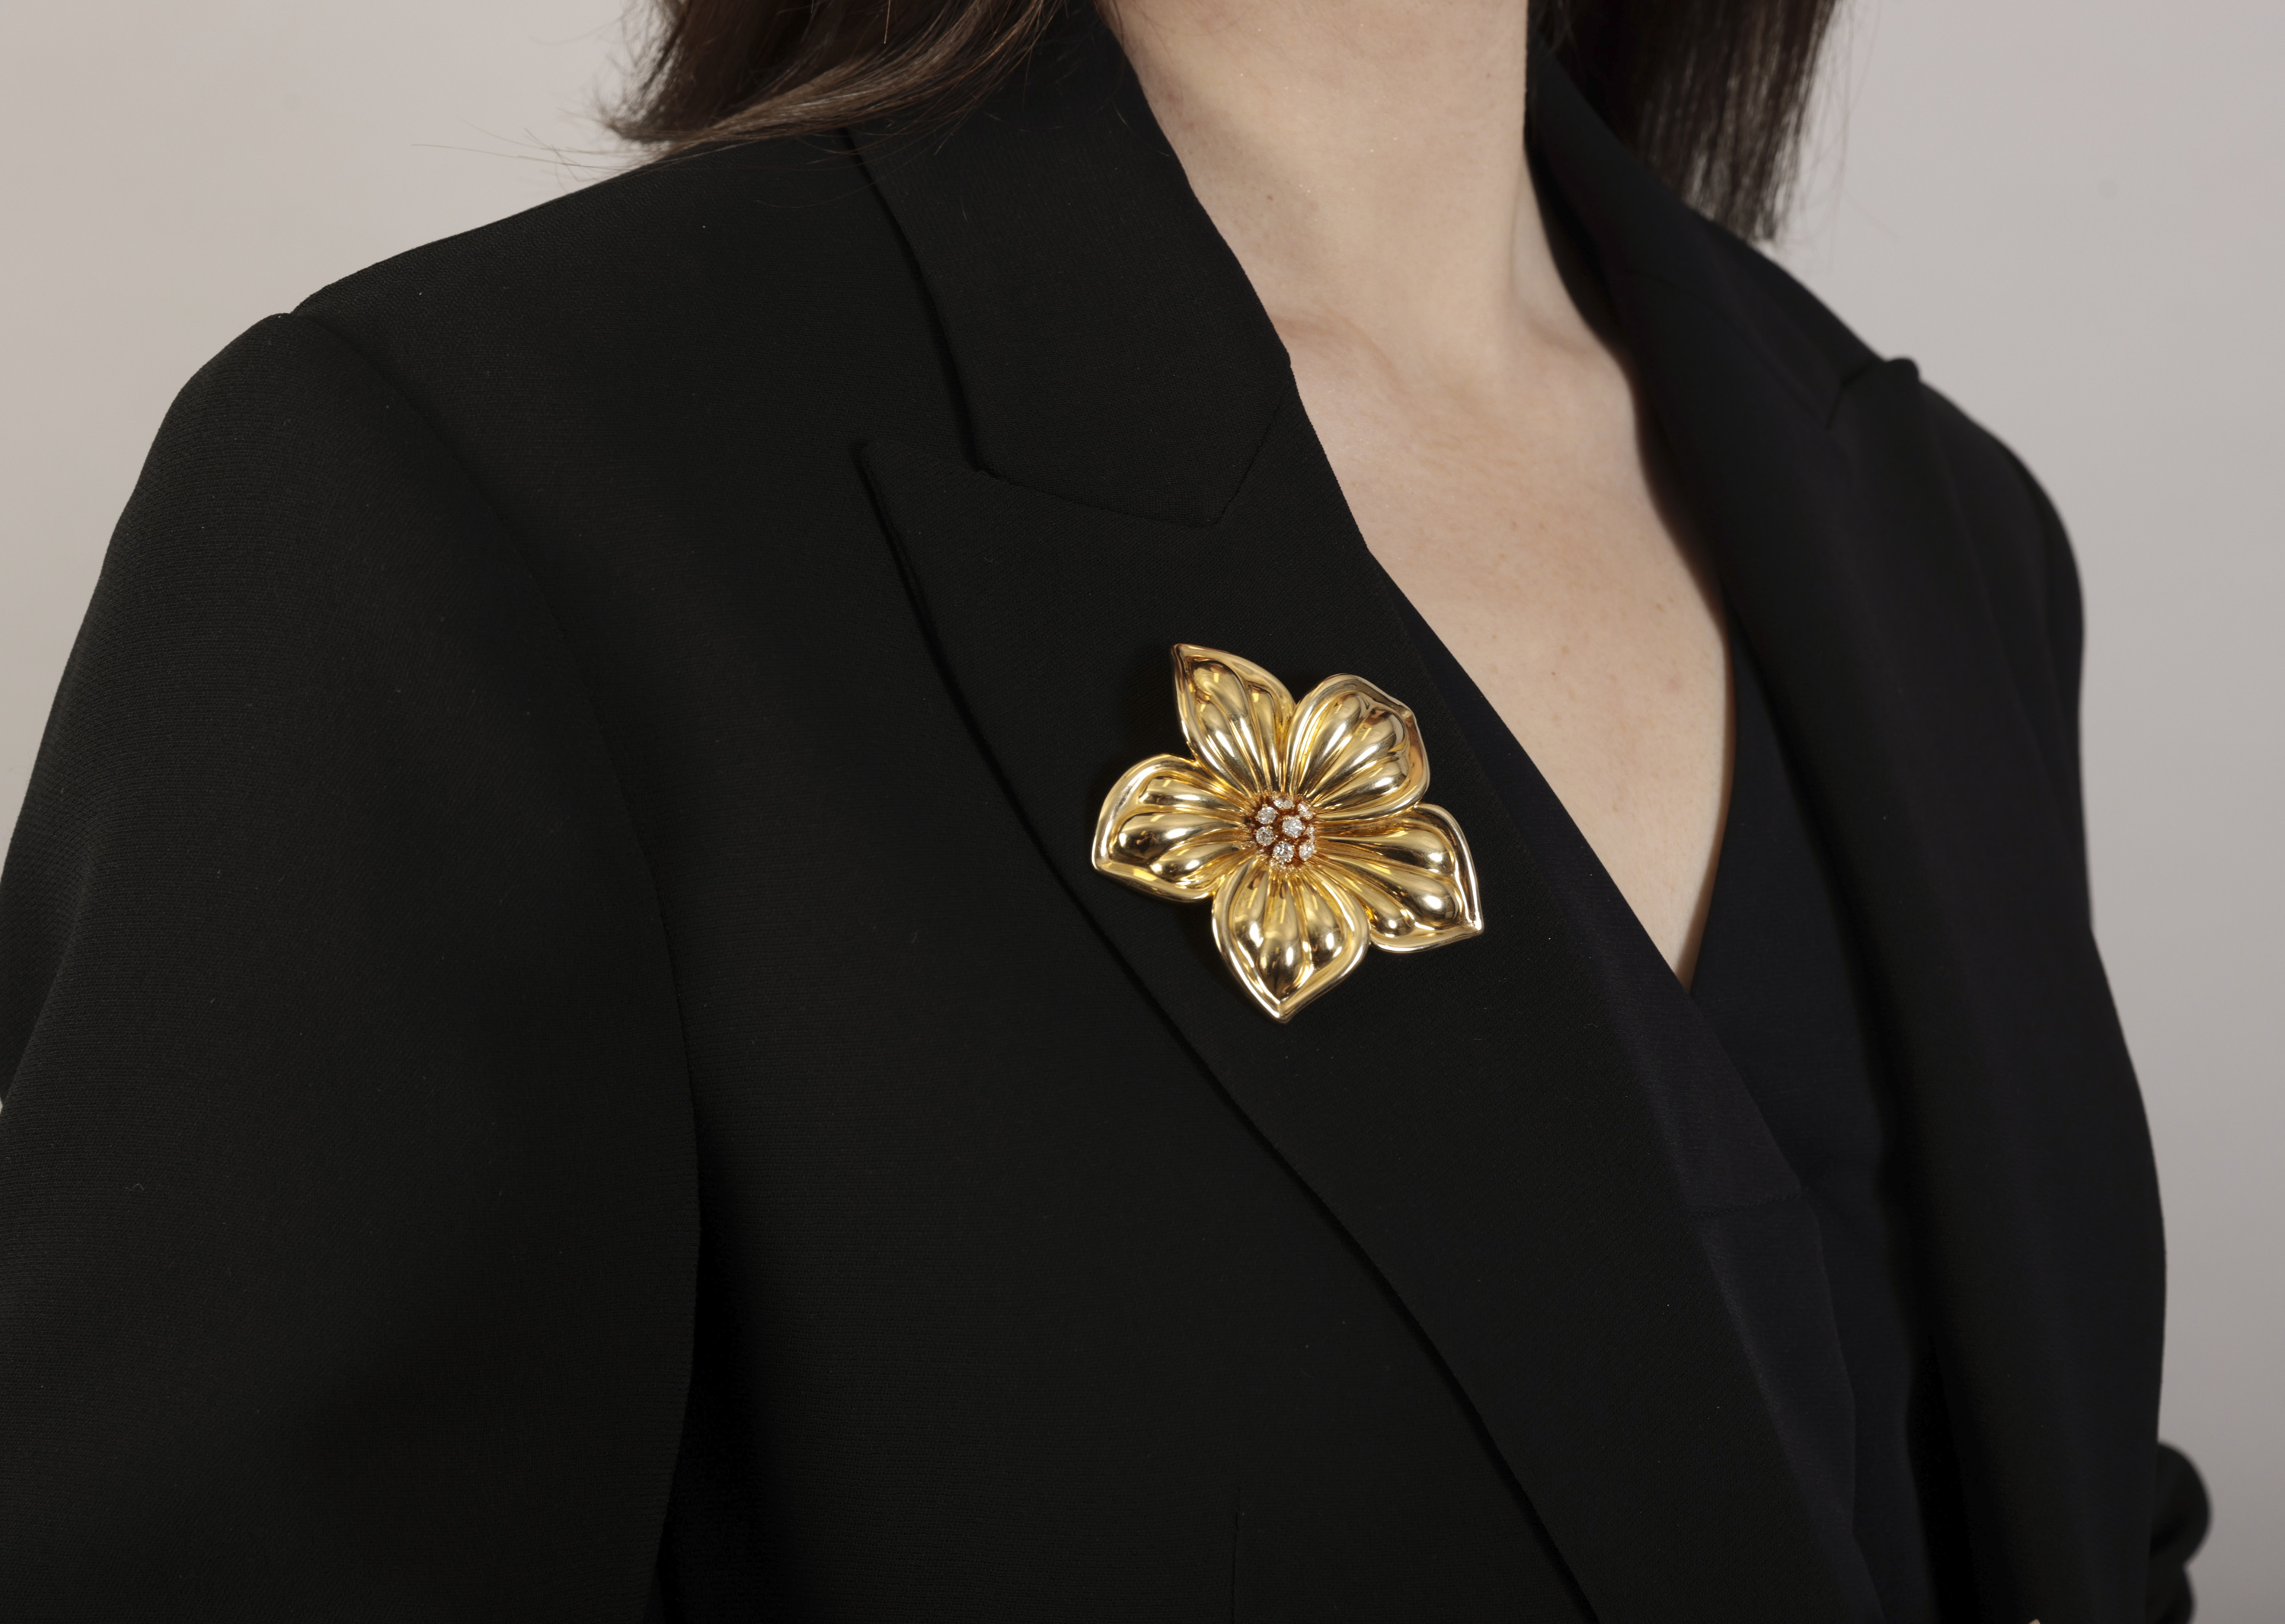 A DIAMOND 'DIANA' BROOCH, BY VAN CLEEF & ARPELS, CIRCA 1990 Designed as a sculpted flowerhead, the - Image 5 of 5